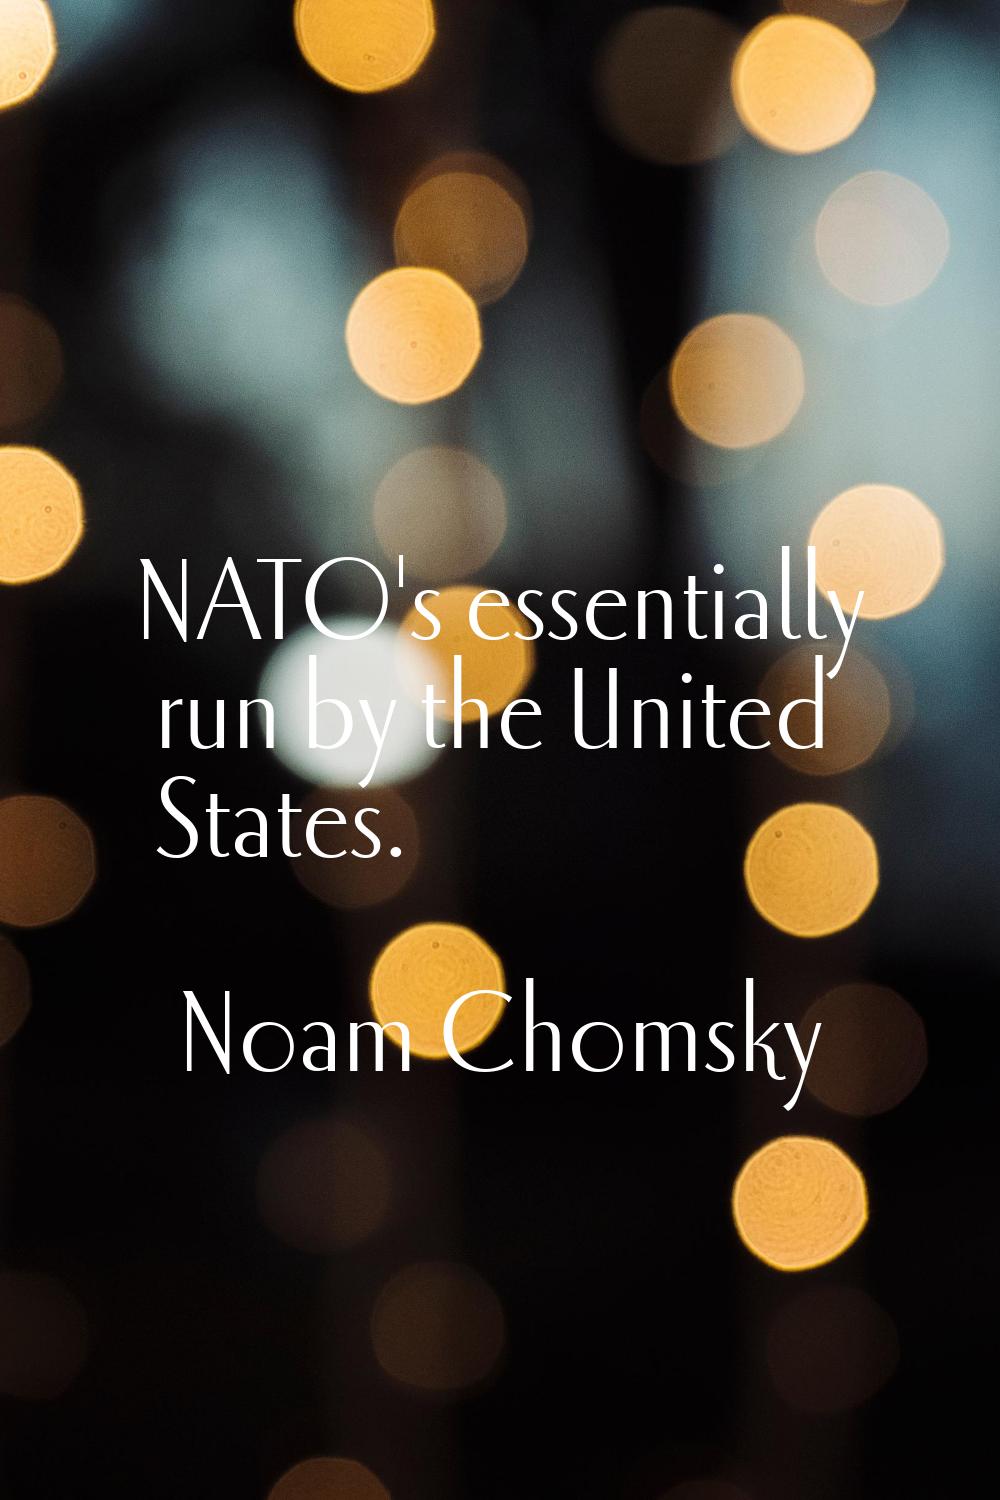 NATO's essentially run by the United States.